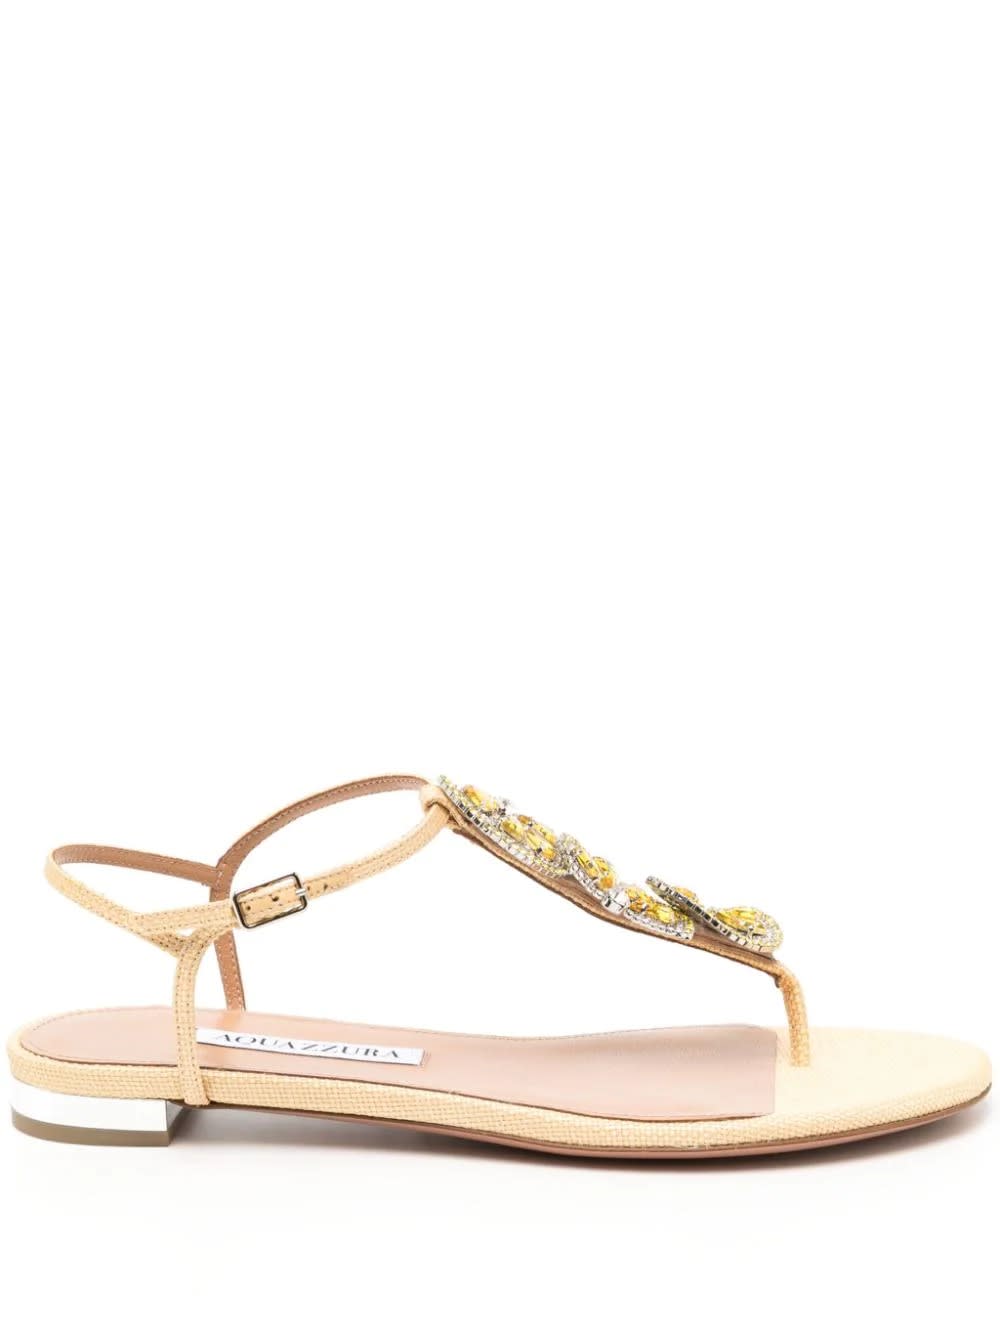 Gin Tonicn Flat Sandals In Natural Fabric